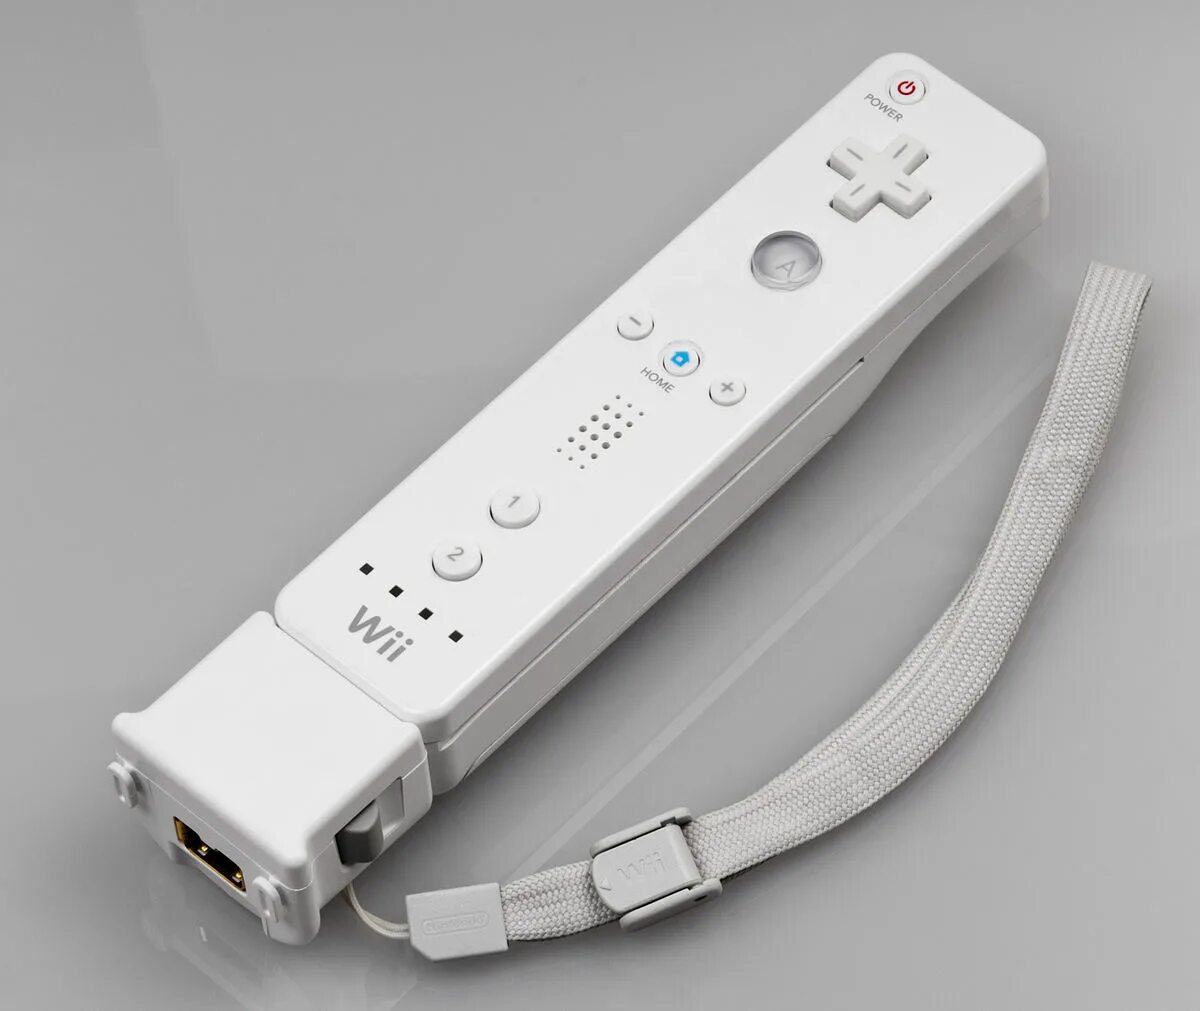 Device extension. Пульт Нинтендо Wii. Nintendo Wii Motion Plus Adapter. Wii Remote Motion Plus. Nintendo Wii пульт Коннект.